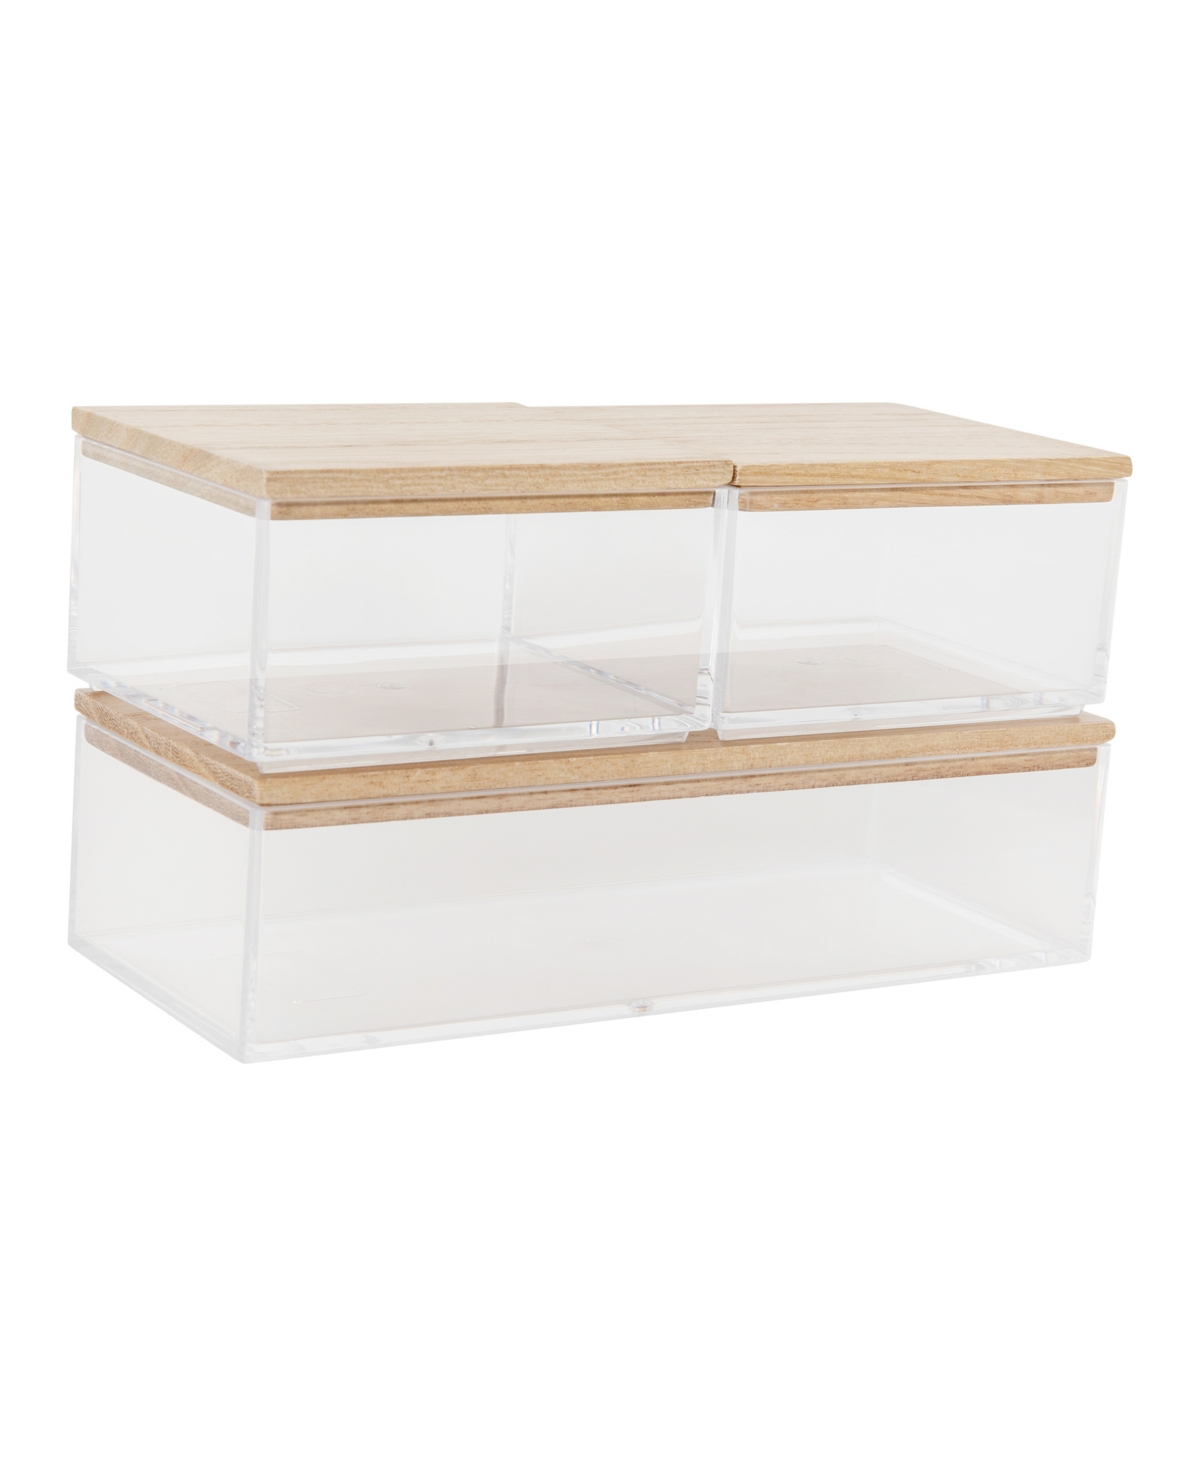 Martha Stewart Brody Plastic Storage Organizer Bins With Paulownia Wood Lids For Home Office, Kitchen, Or Bathroom, In Clear,light Natural